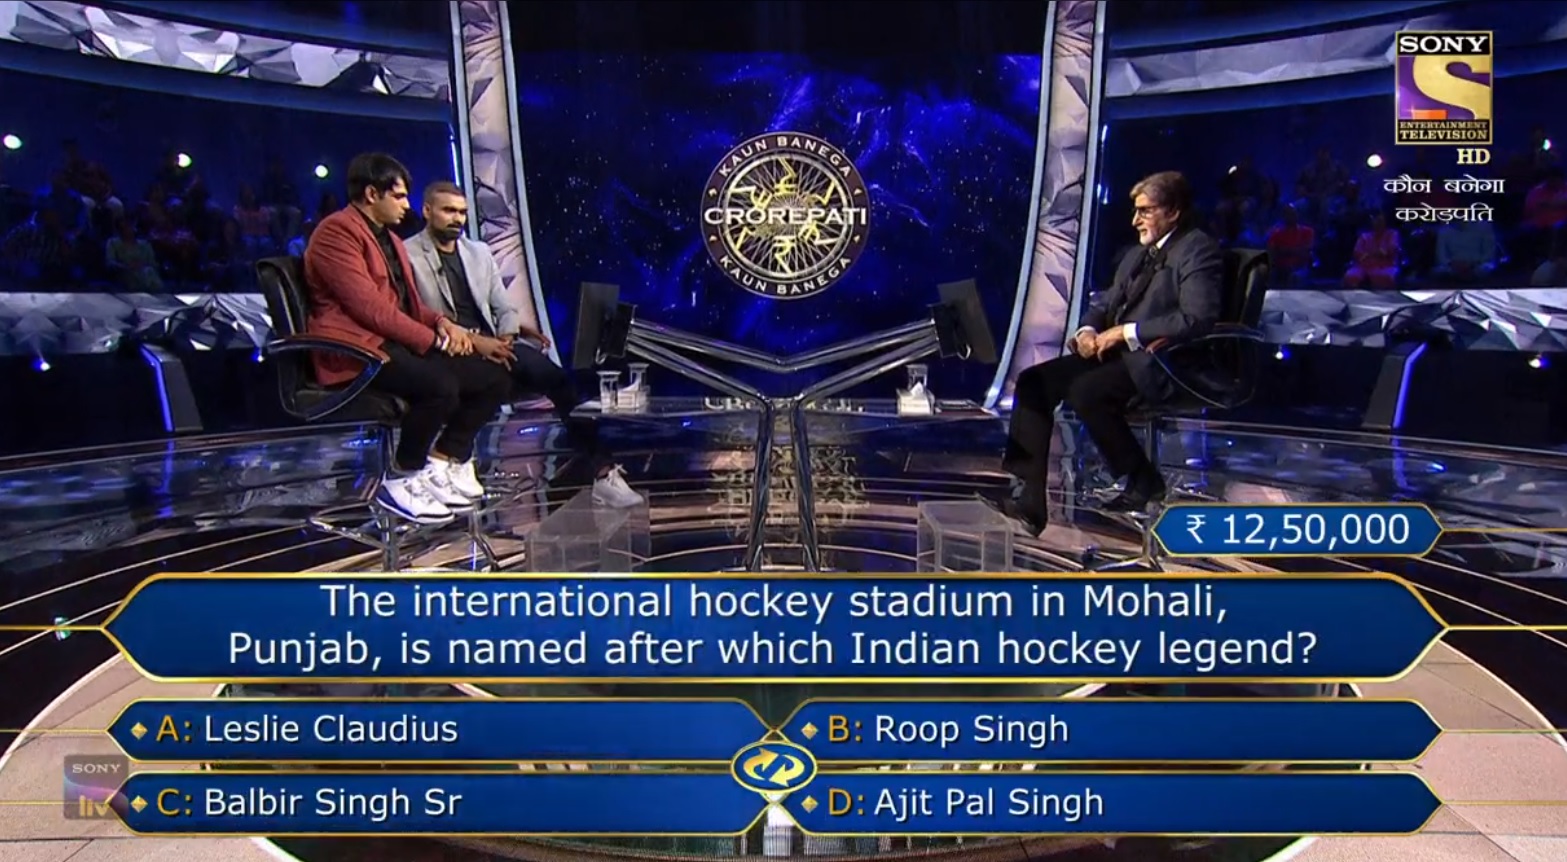 Ques : The international hockey stadium in Mohali, Punjab, is named after which Indian Hockey legend?